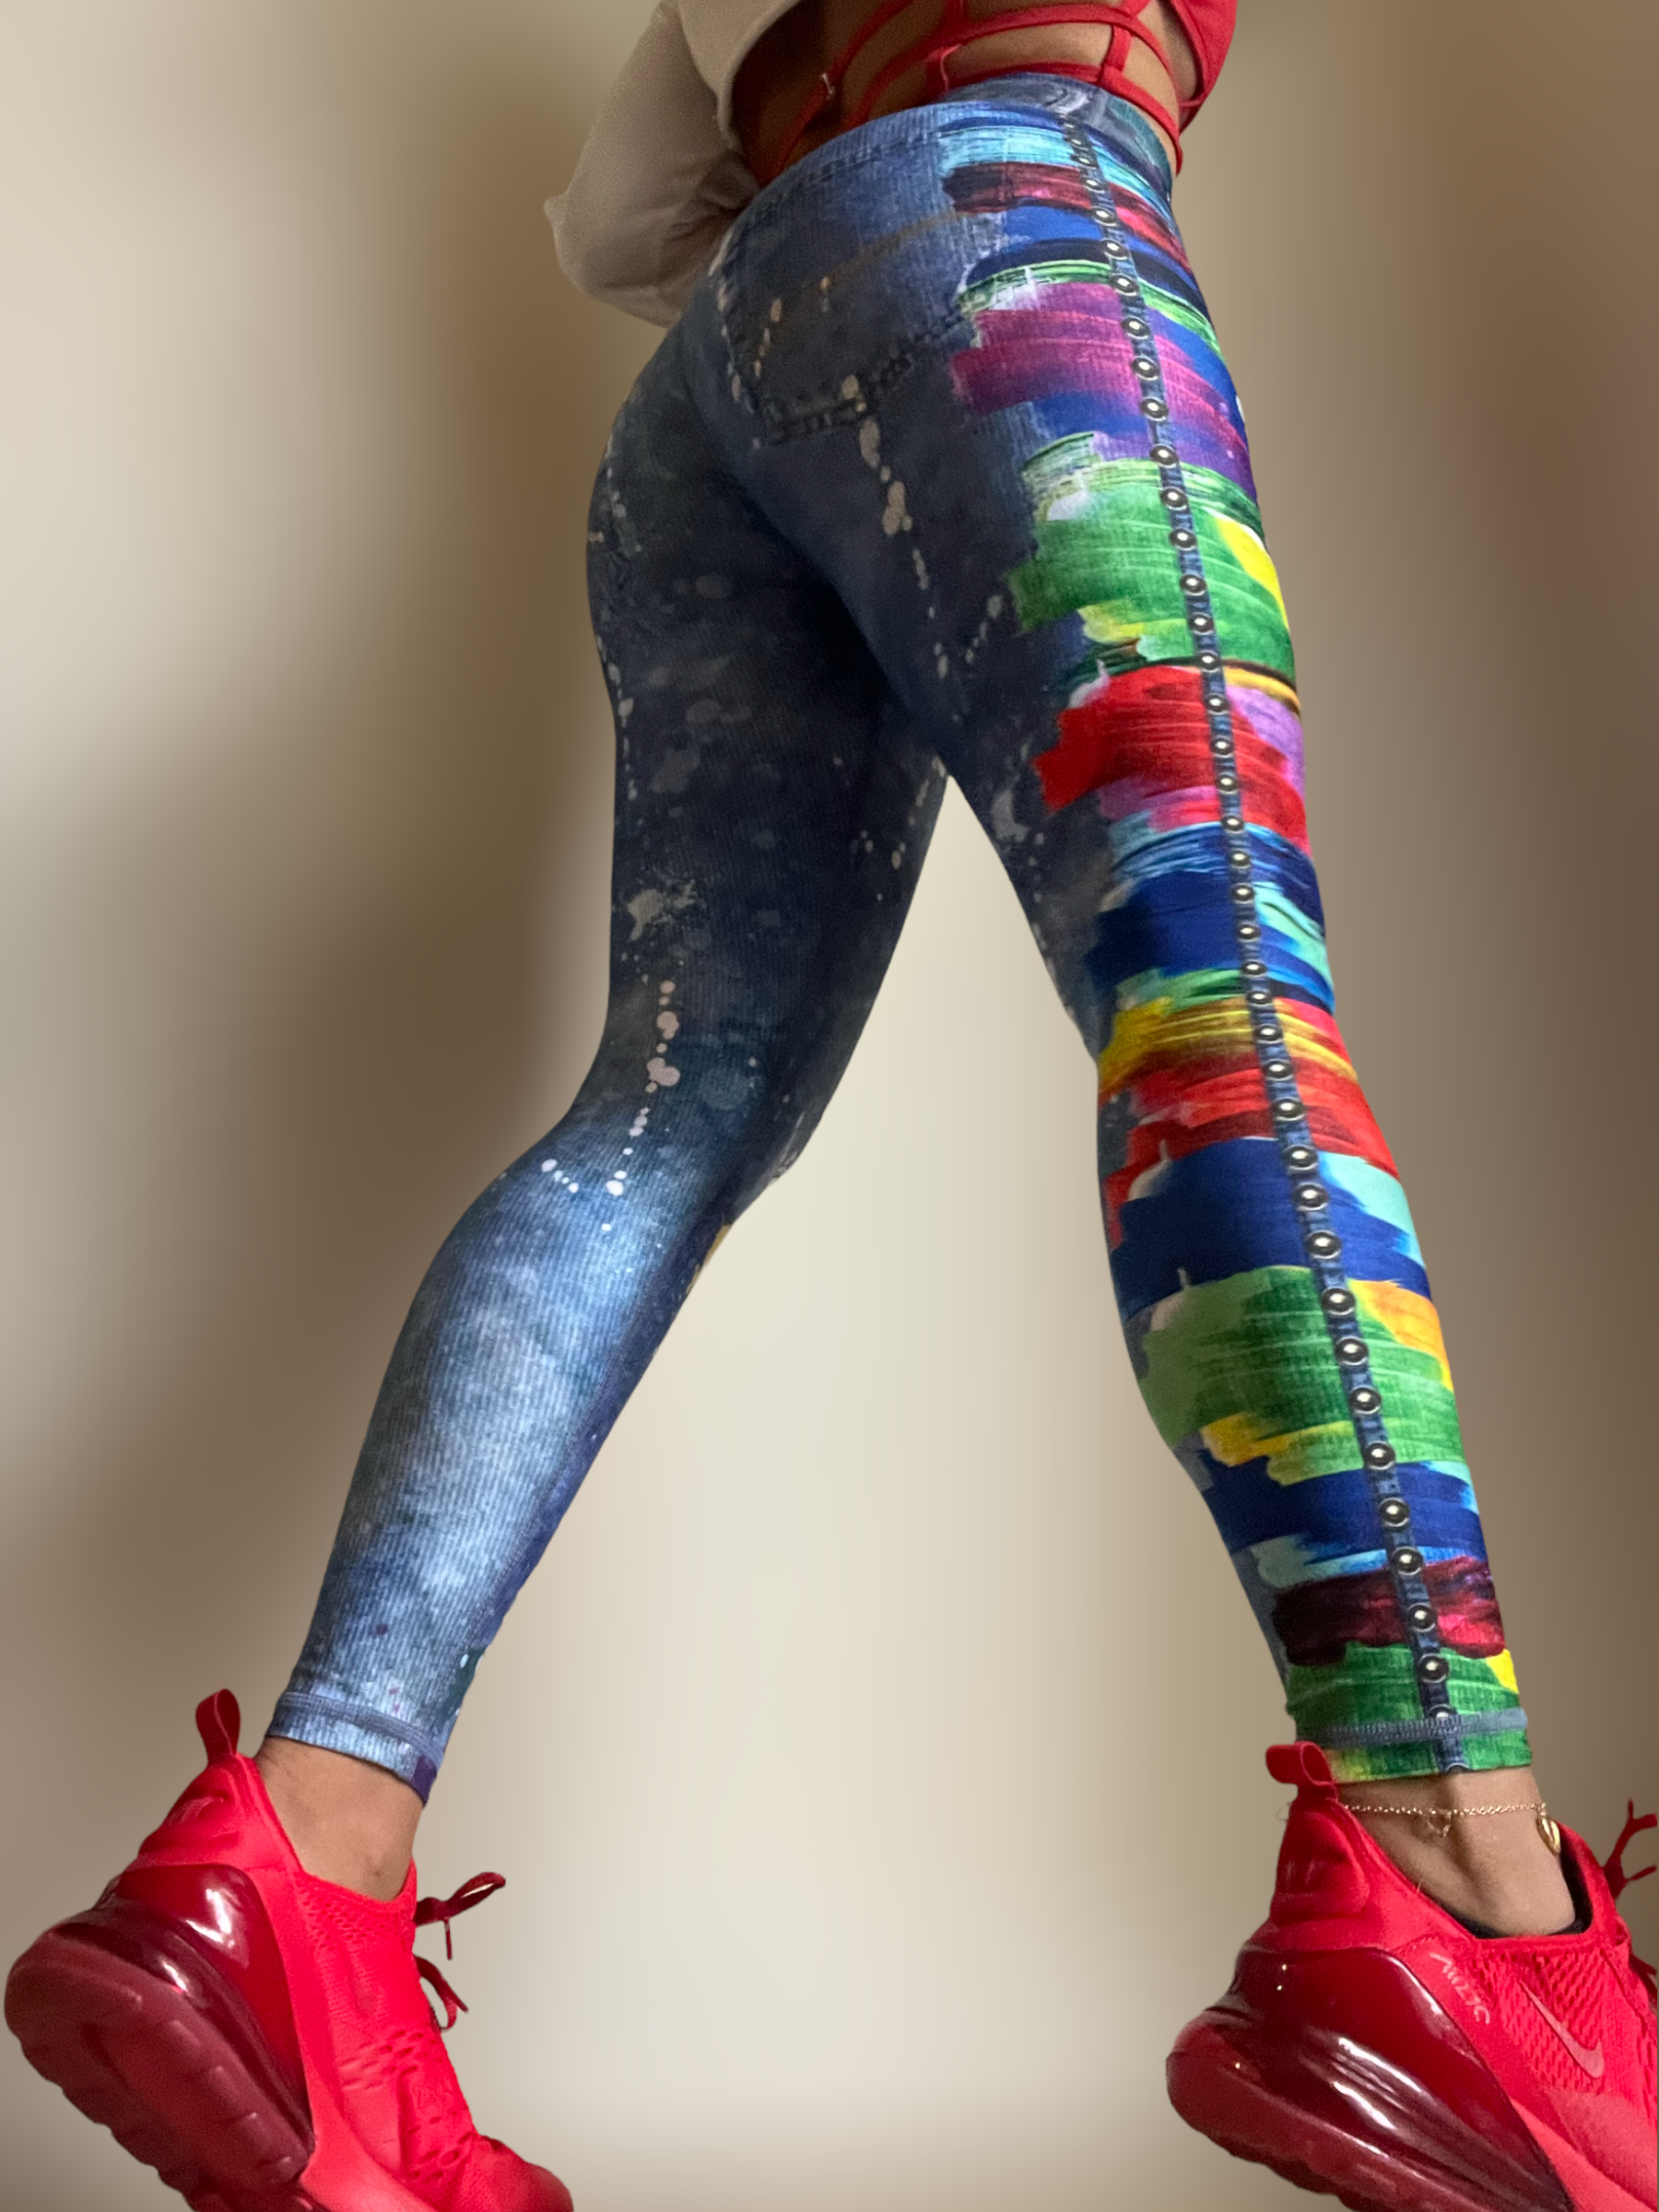 Legging jeans LOL -figures and colors